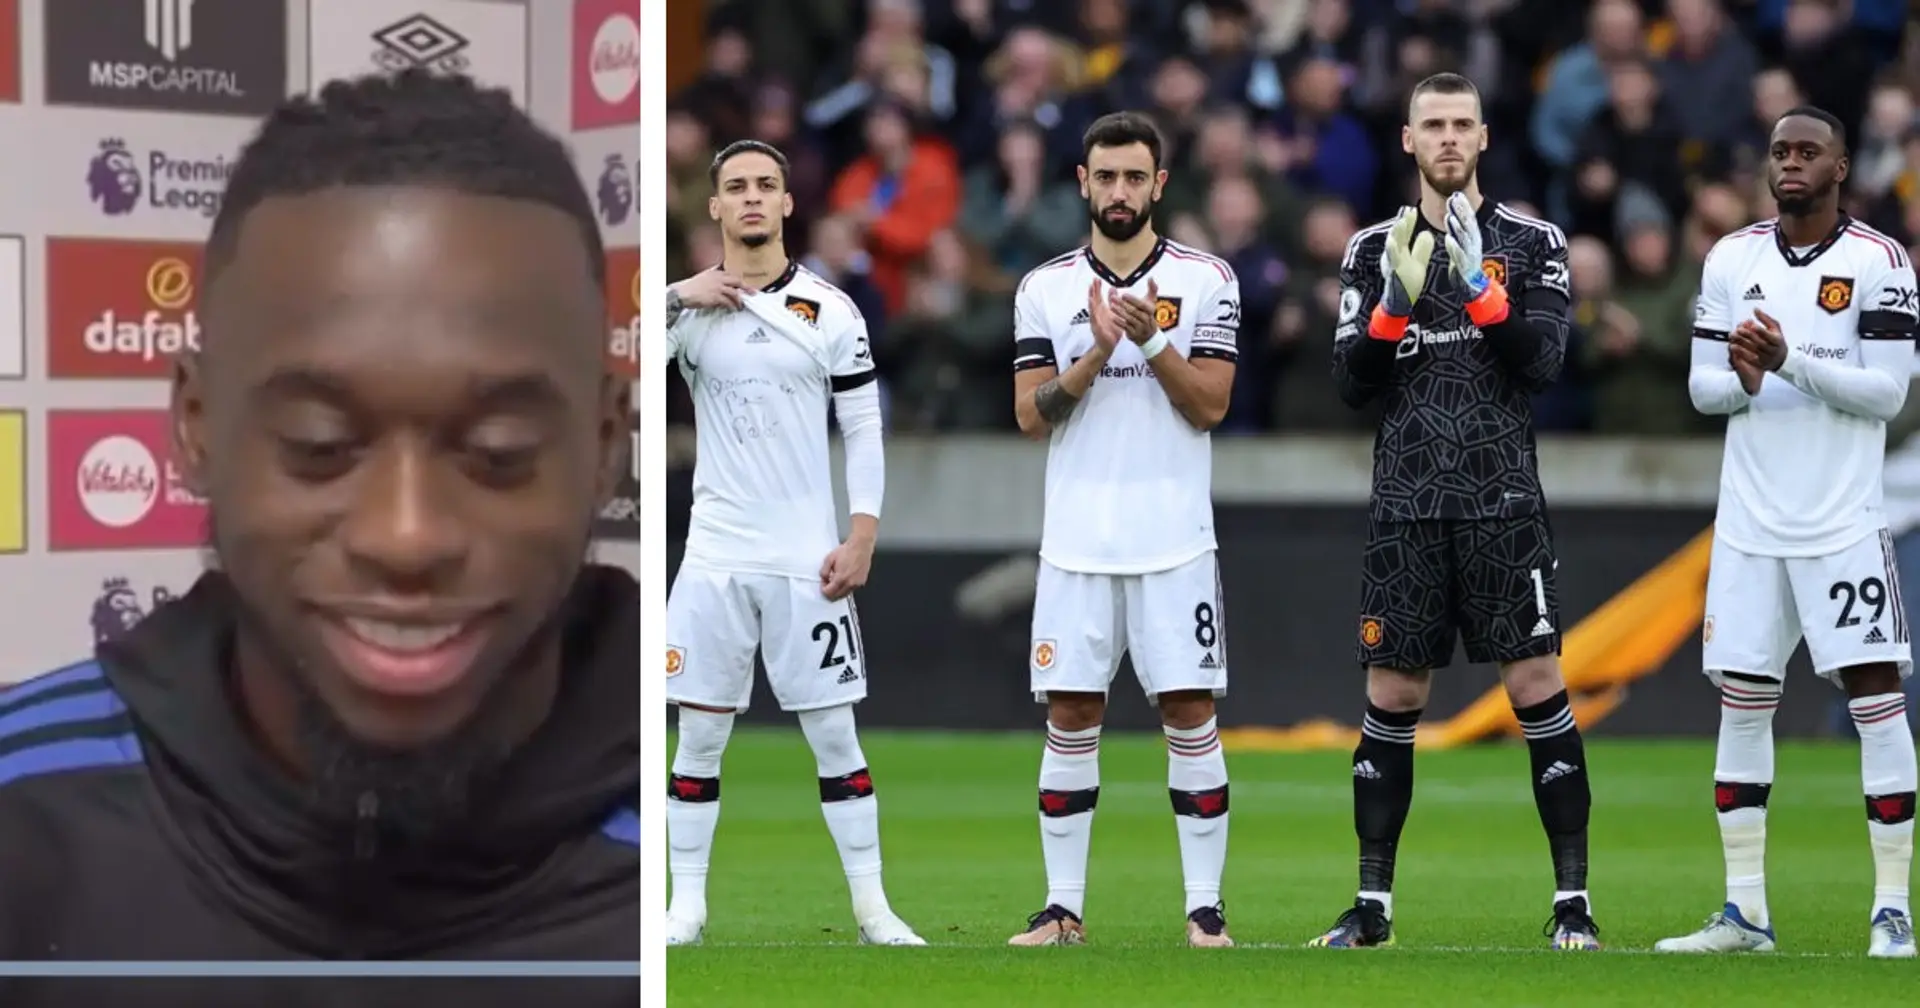 'A lot more to come': Wan-Bissaka excited about partnership with Man United teammate 